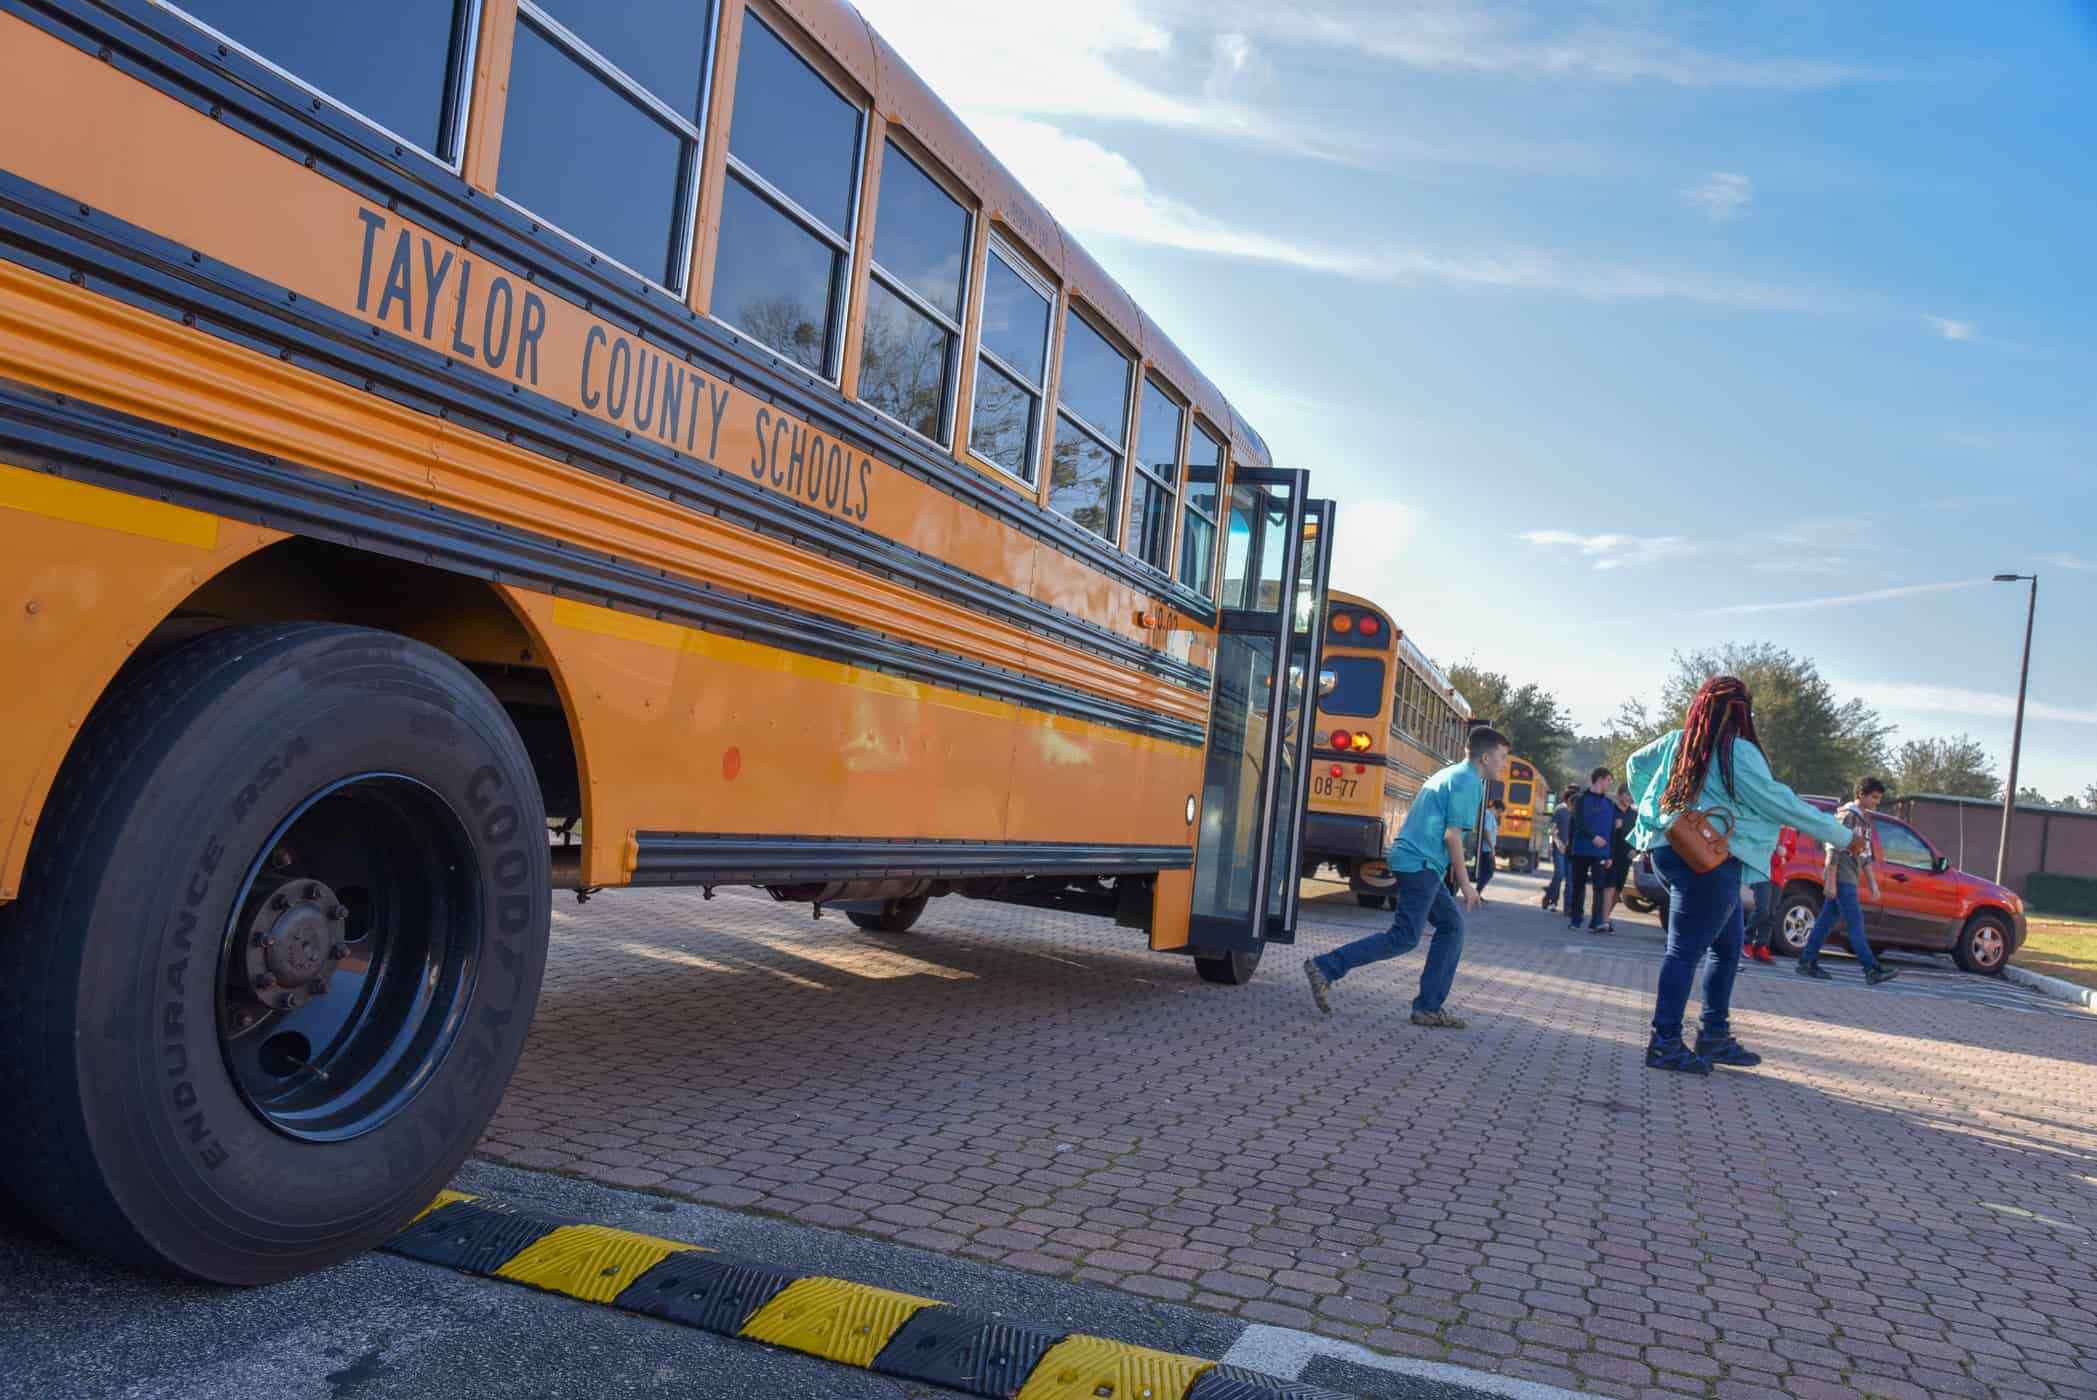 A Taylor County Middle School student exits the school bus before running into a tour on South Georgia Tech’s campus.